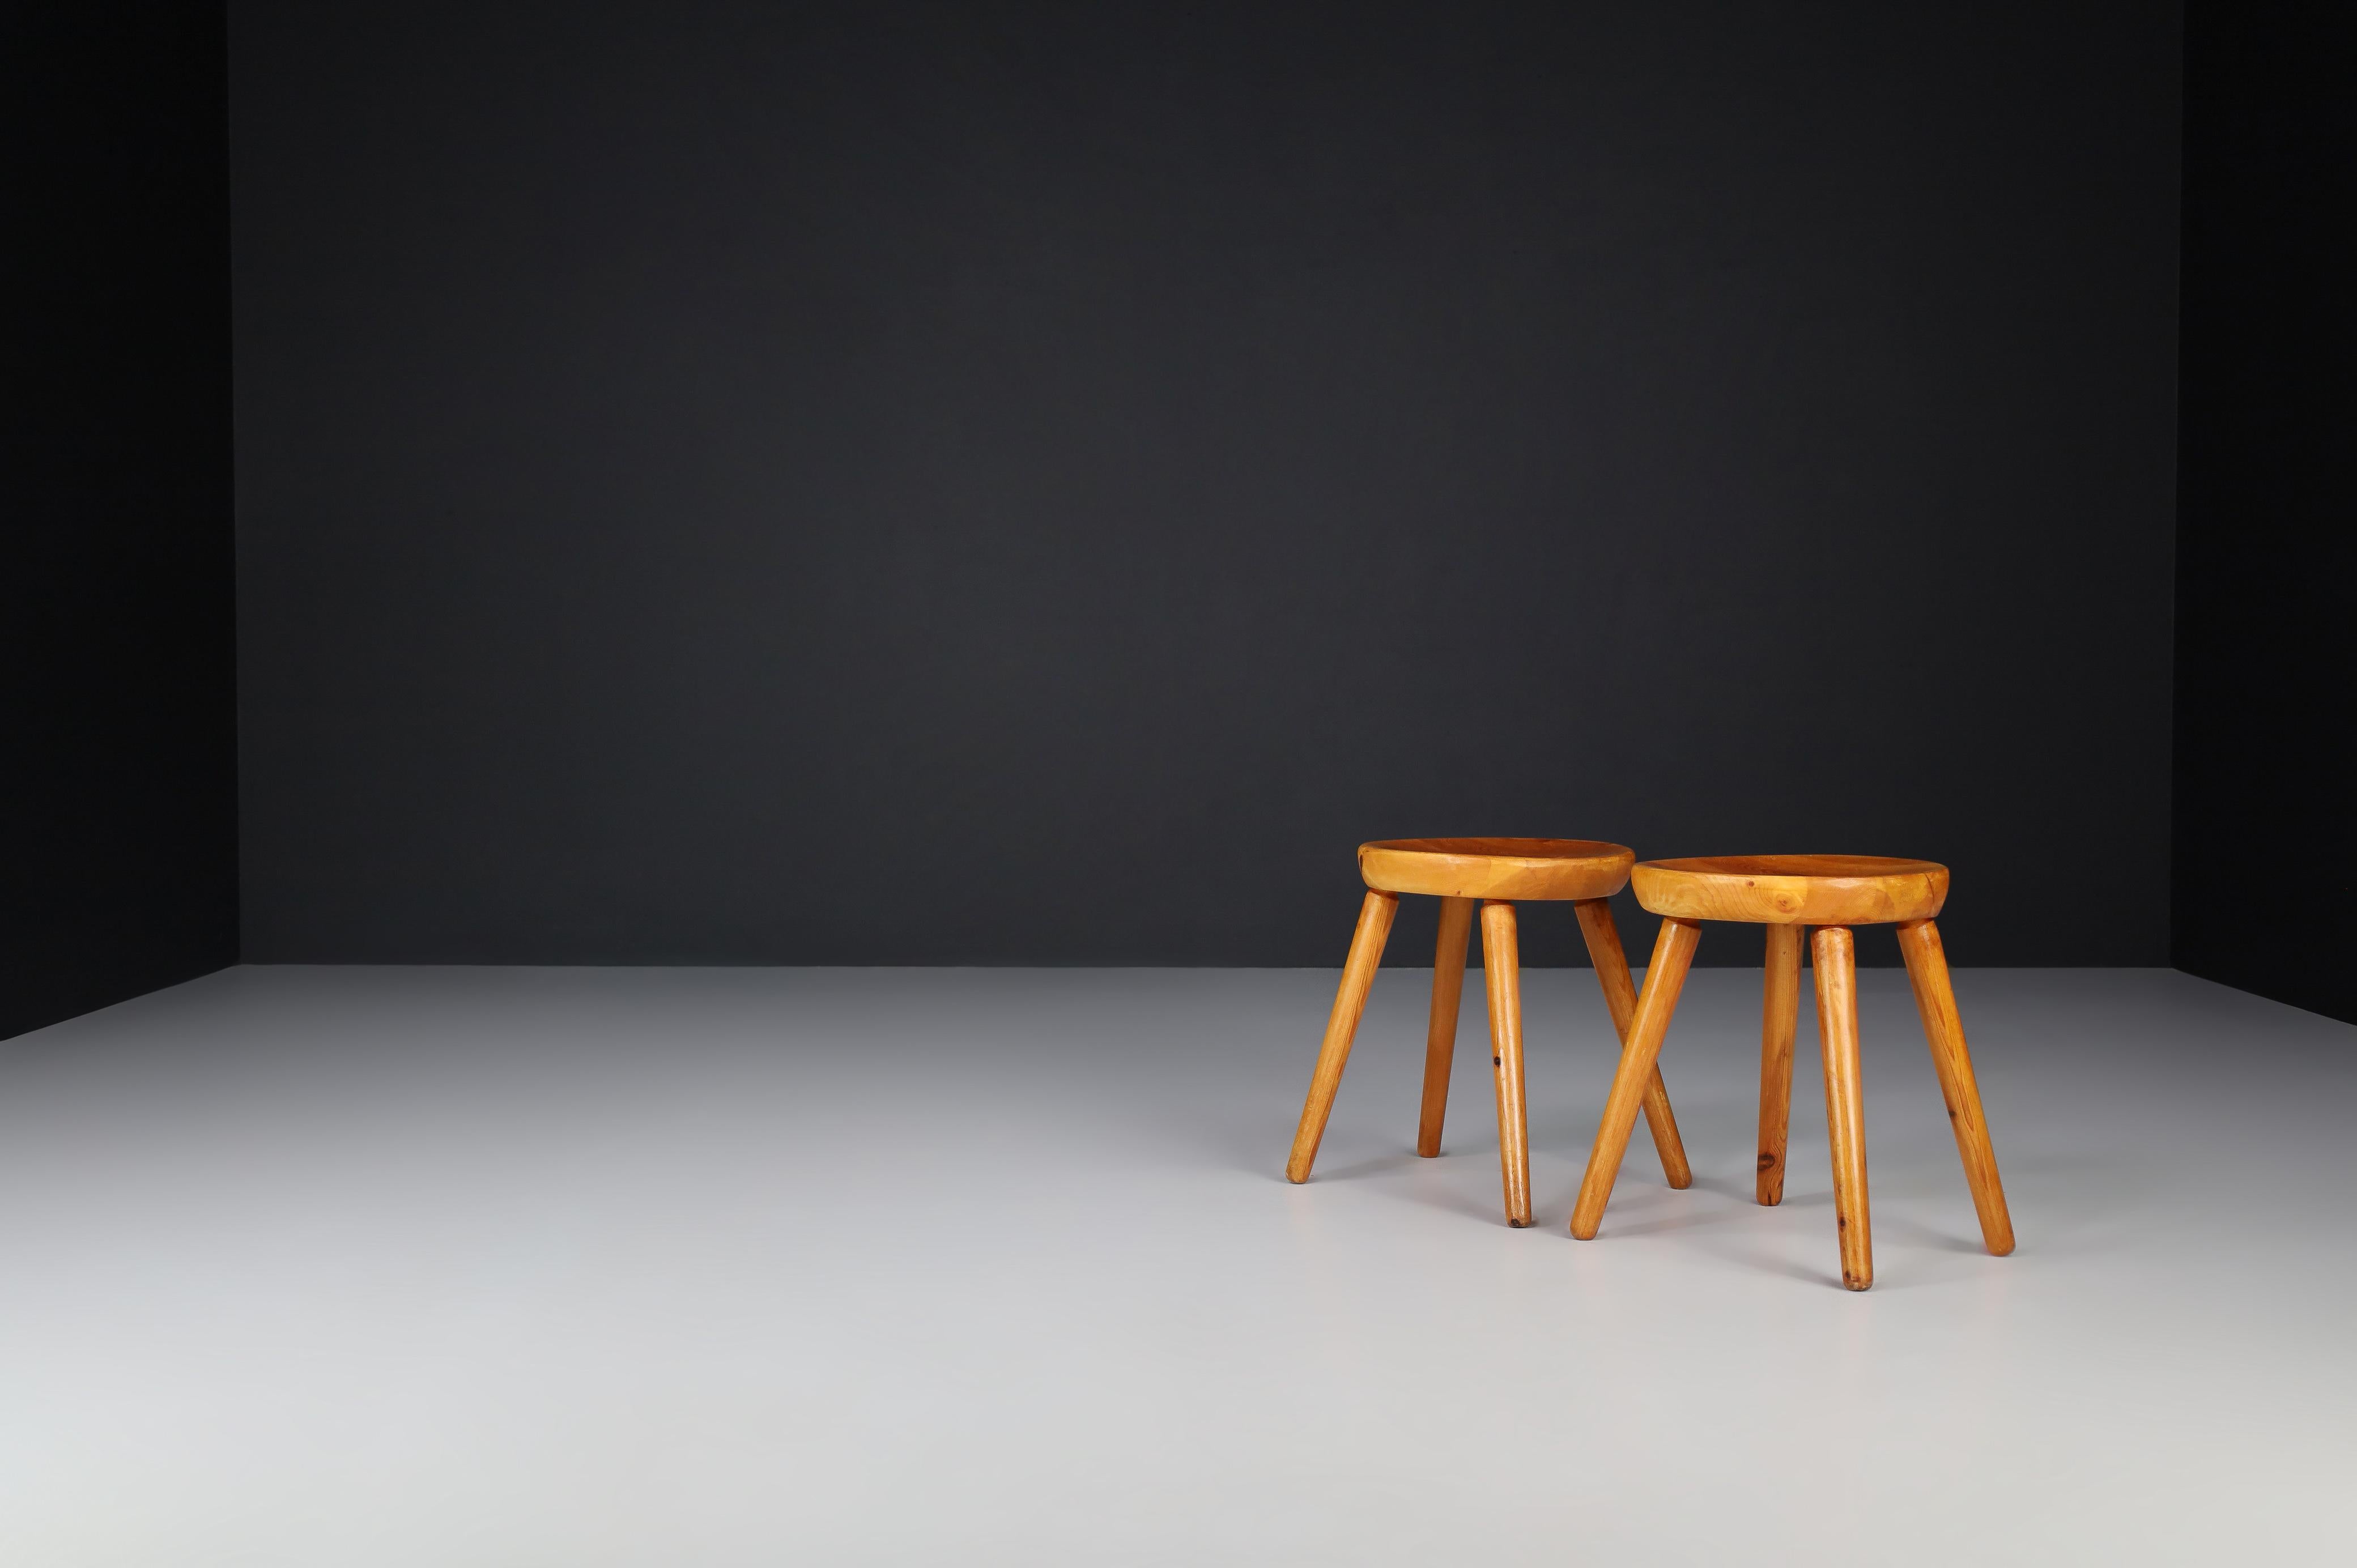 Pinewood French Stools in the Style of Charlotte Perriand, France, 1950s For Sale 1